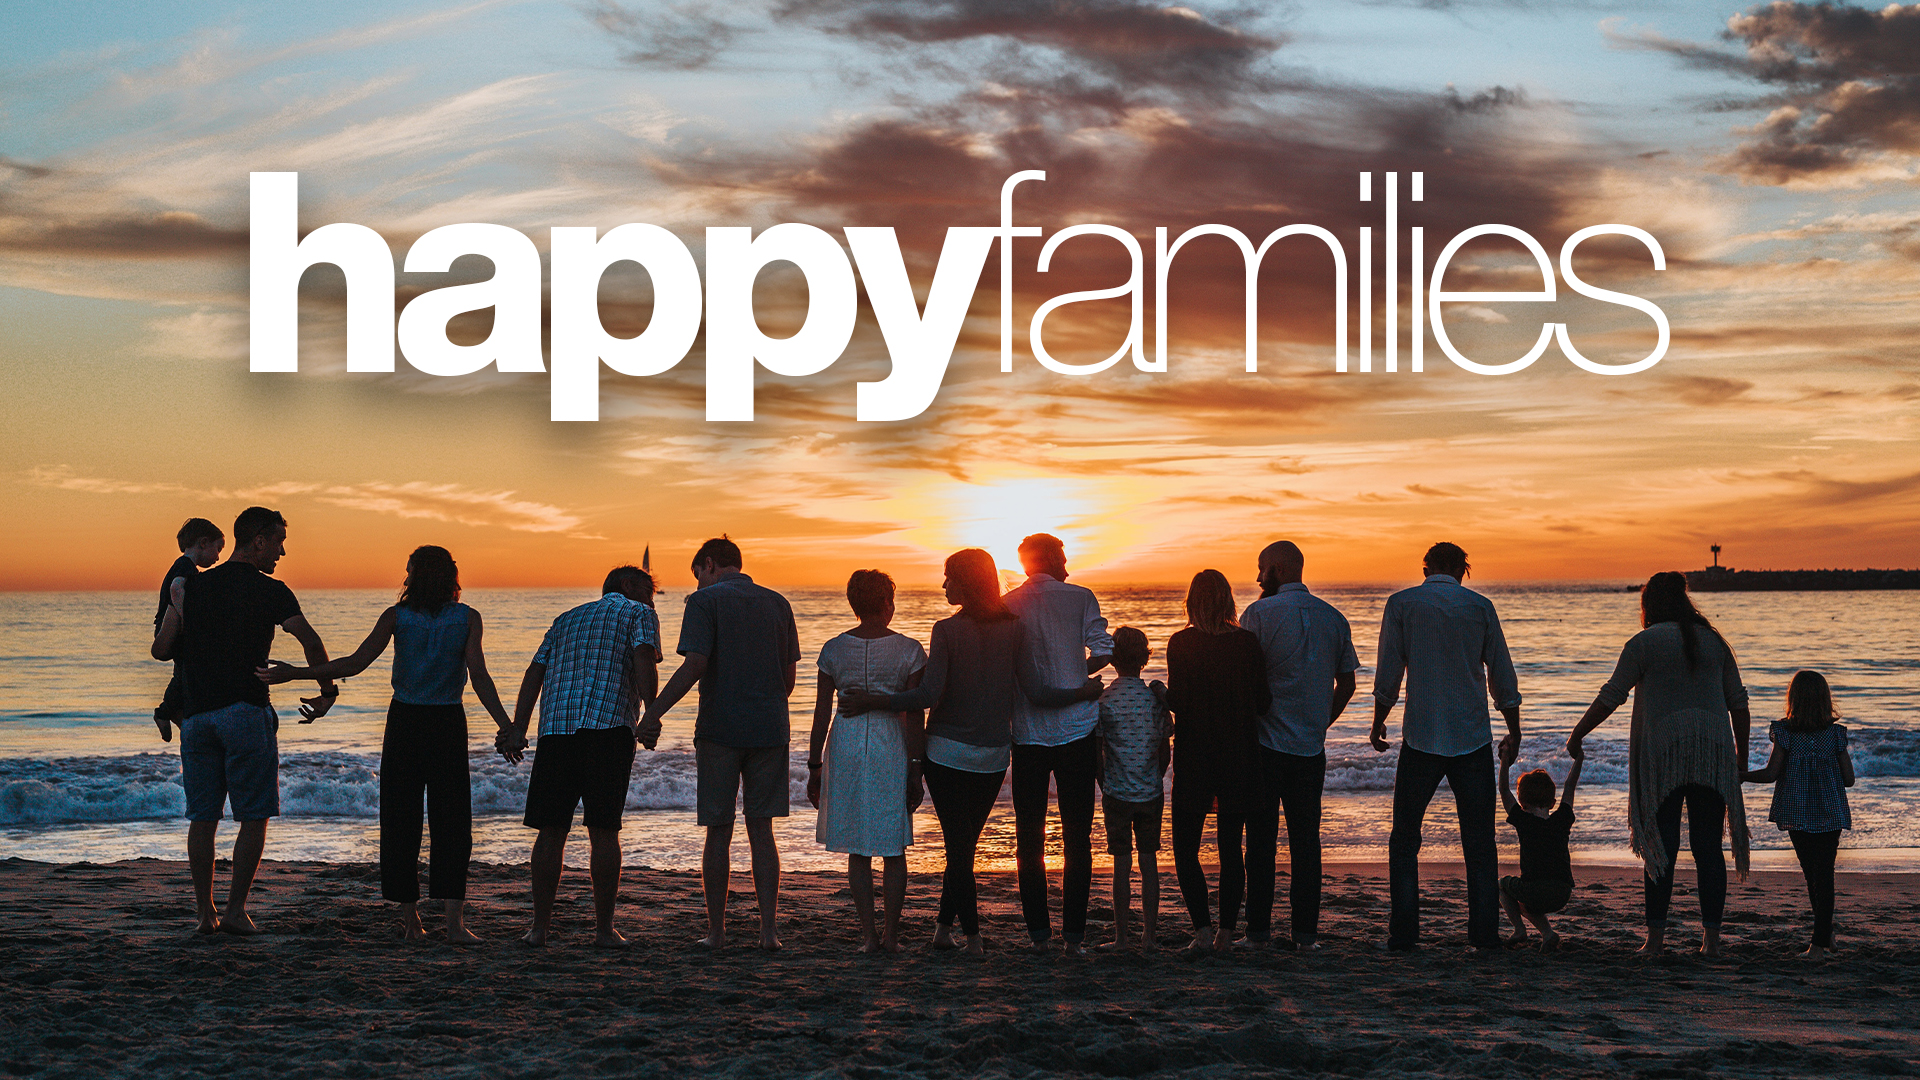 A large family stood on a beach watching the sunset